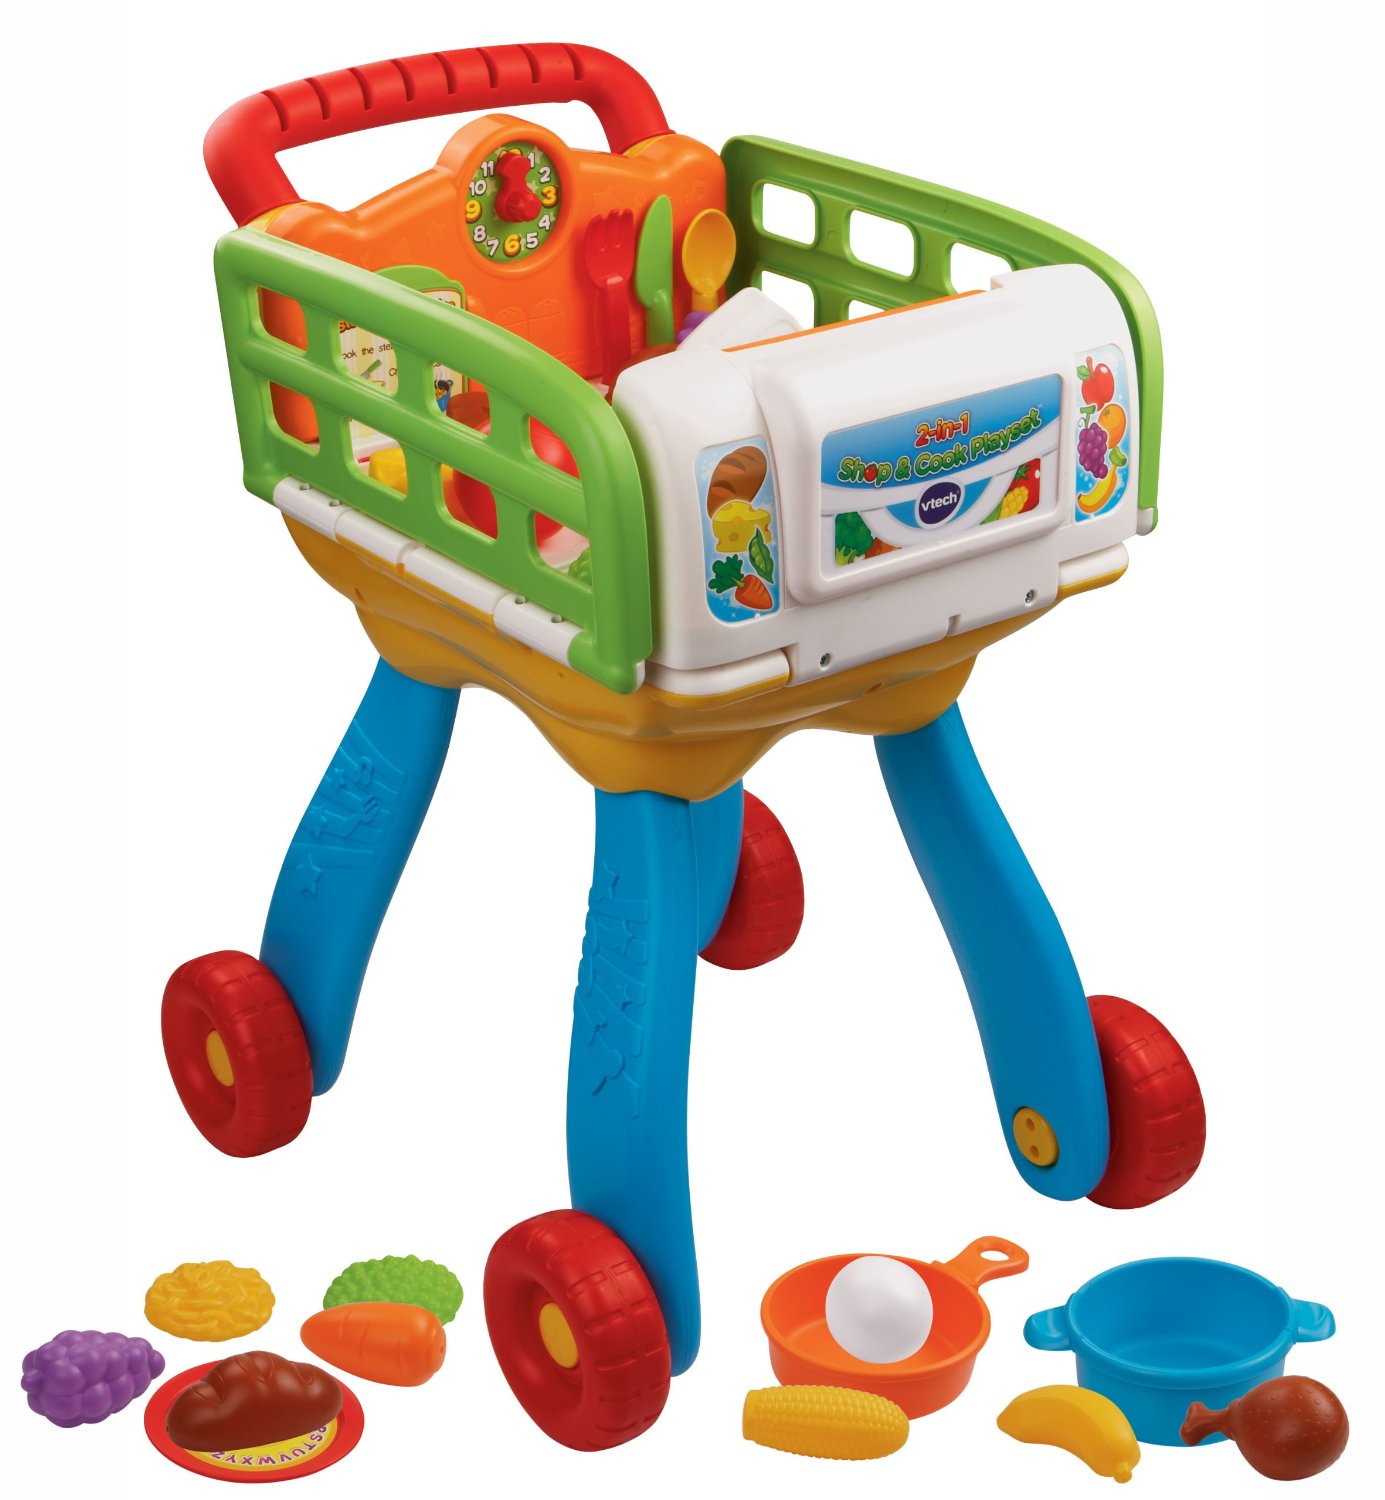 VTech 2-in-1 Shop and Cook Playset